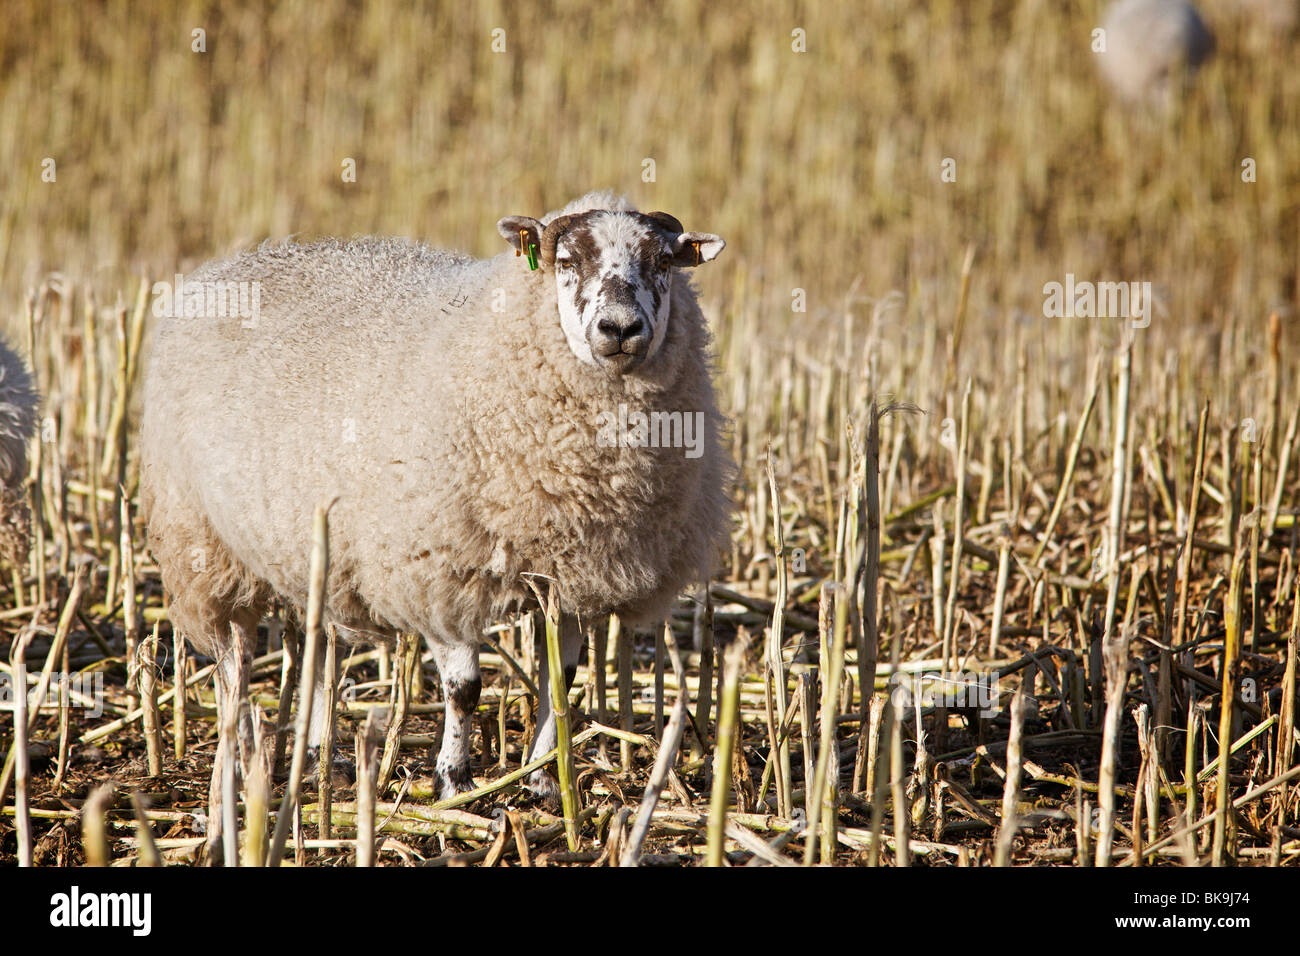 Sheep feeding in a field of brussels sprouts Stock Photo